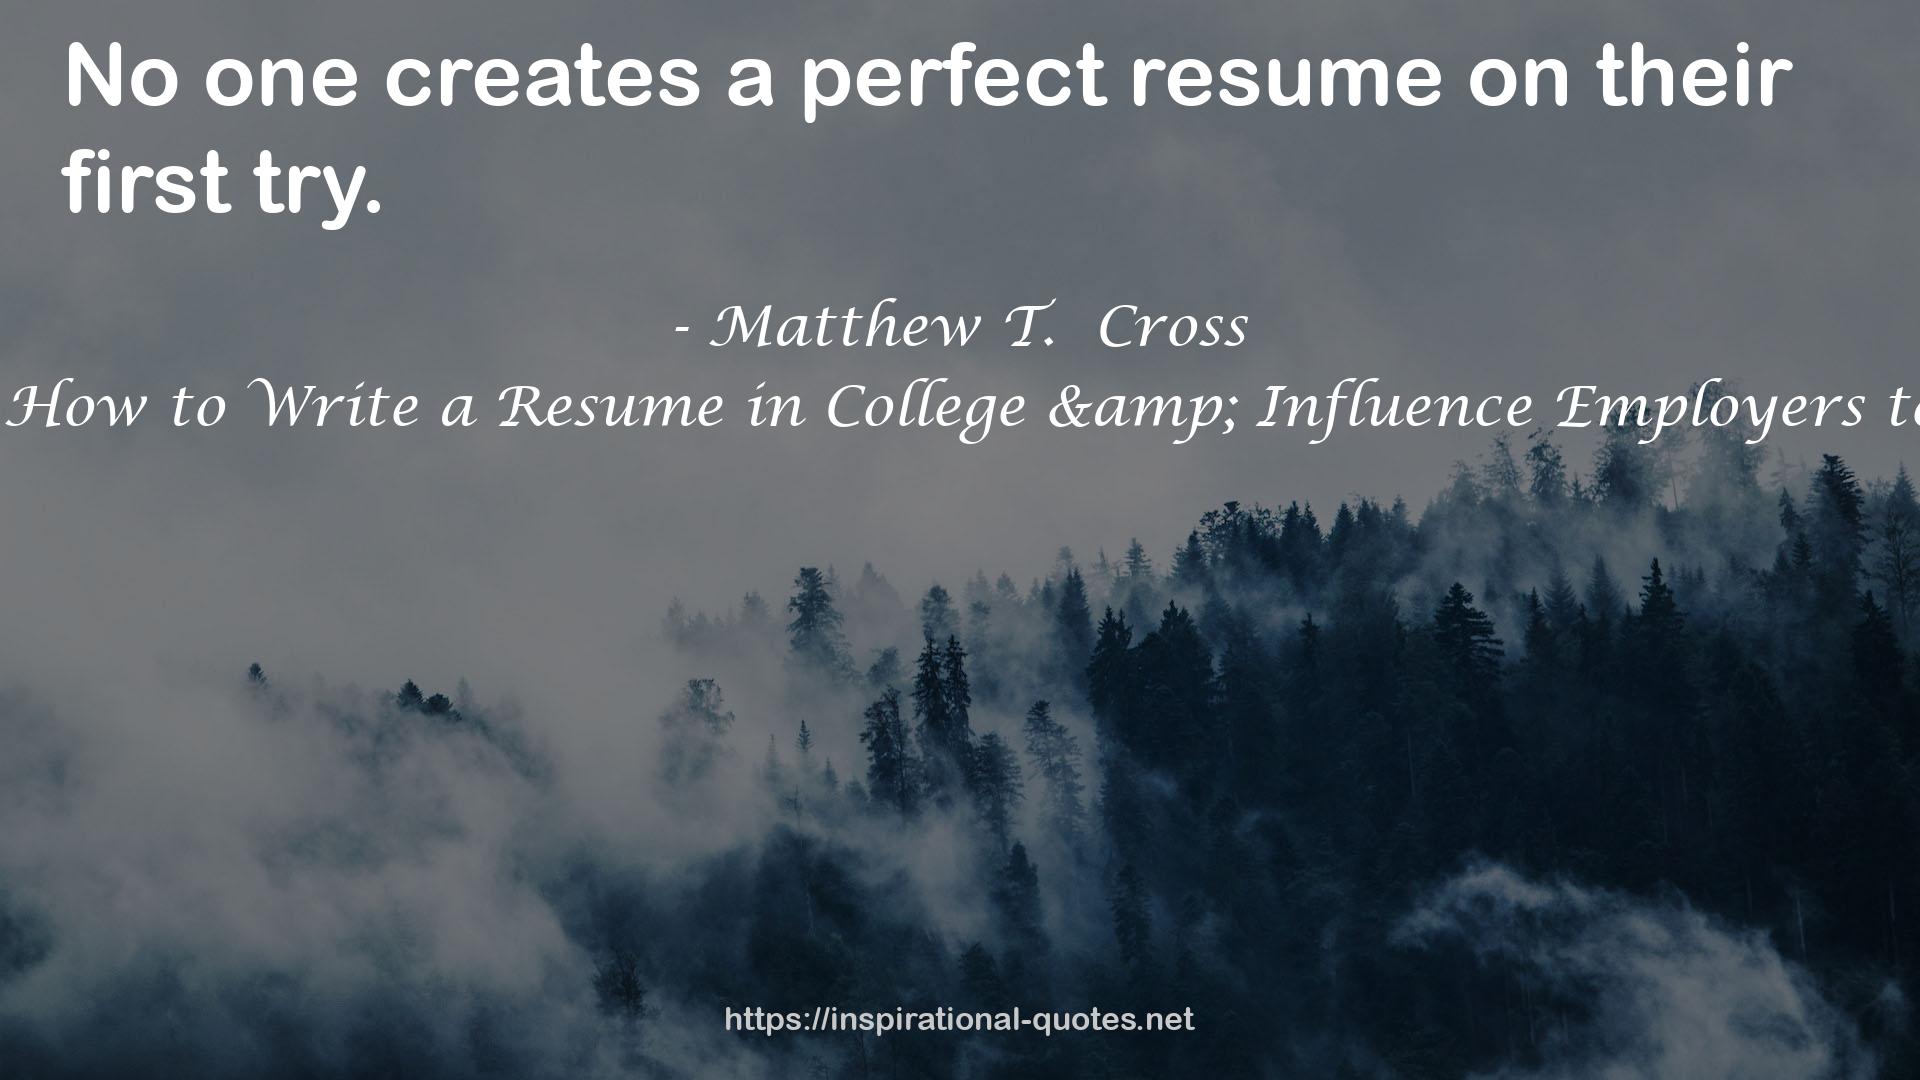 The Resume Design Book: How to Write a Resume in College & Influence Employers to Hire You [Color Edition] QUOTES